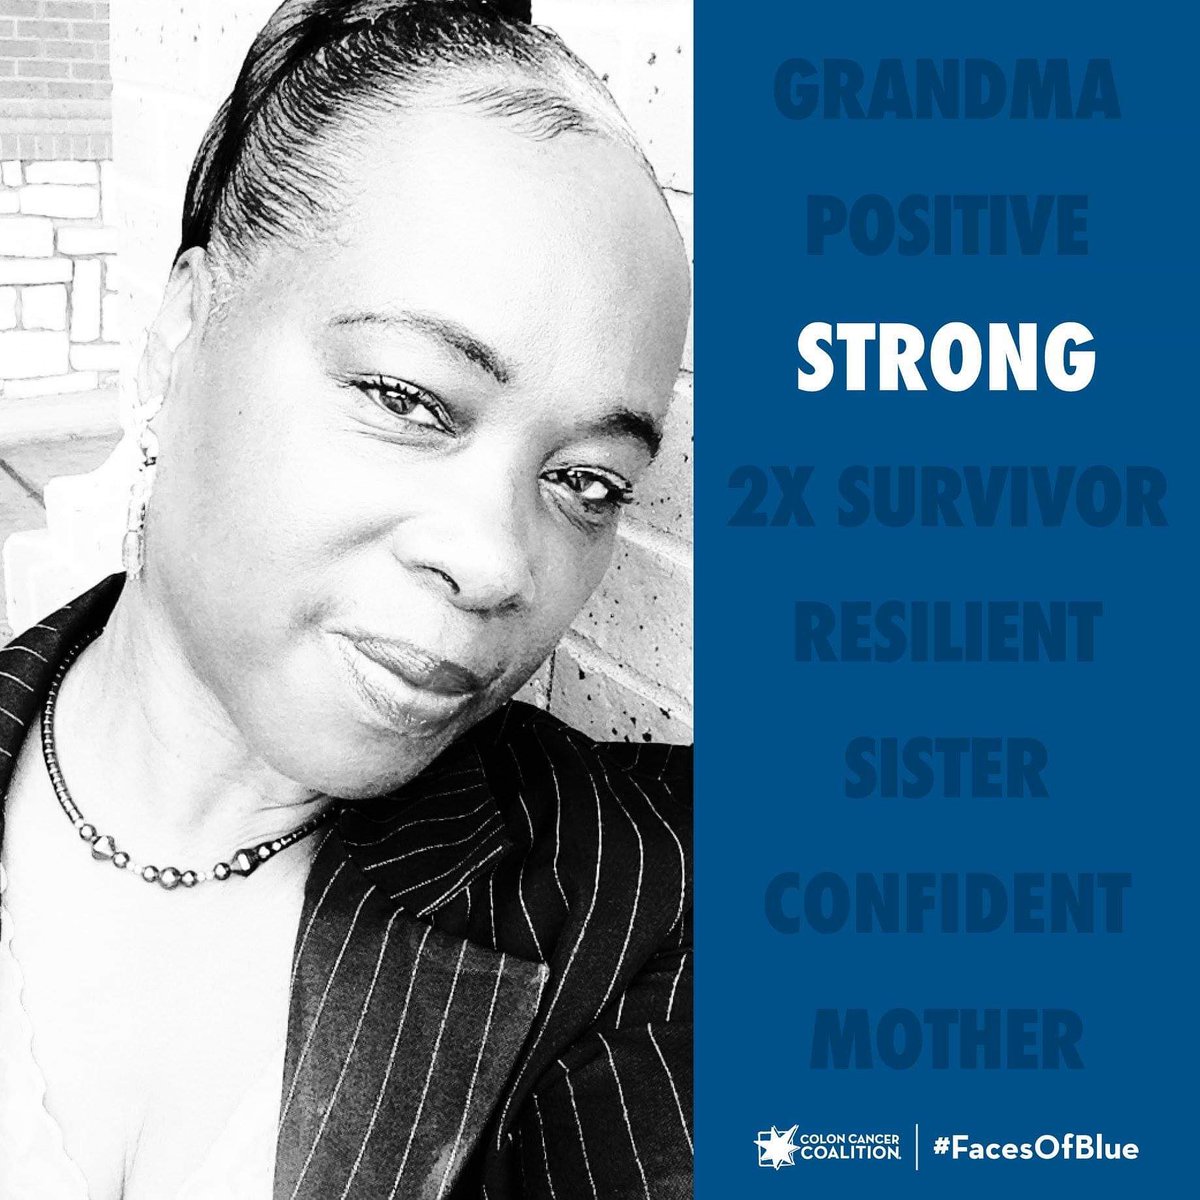 'I let the changes I endured stir me in a good direction. I use my experience with cancer, through the pain and all, to share the joy I have now with others; to give hope and possibly inspire.' #facesofblue coloncancercoalition.org/2019/03/08/fac…